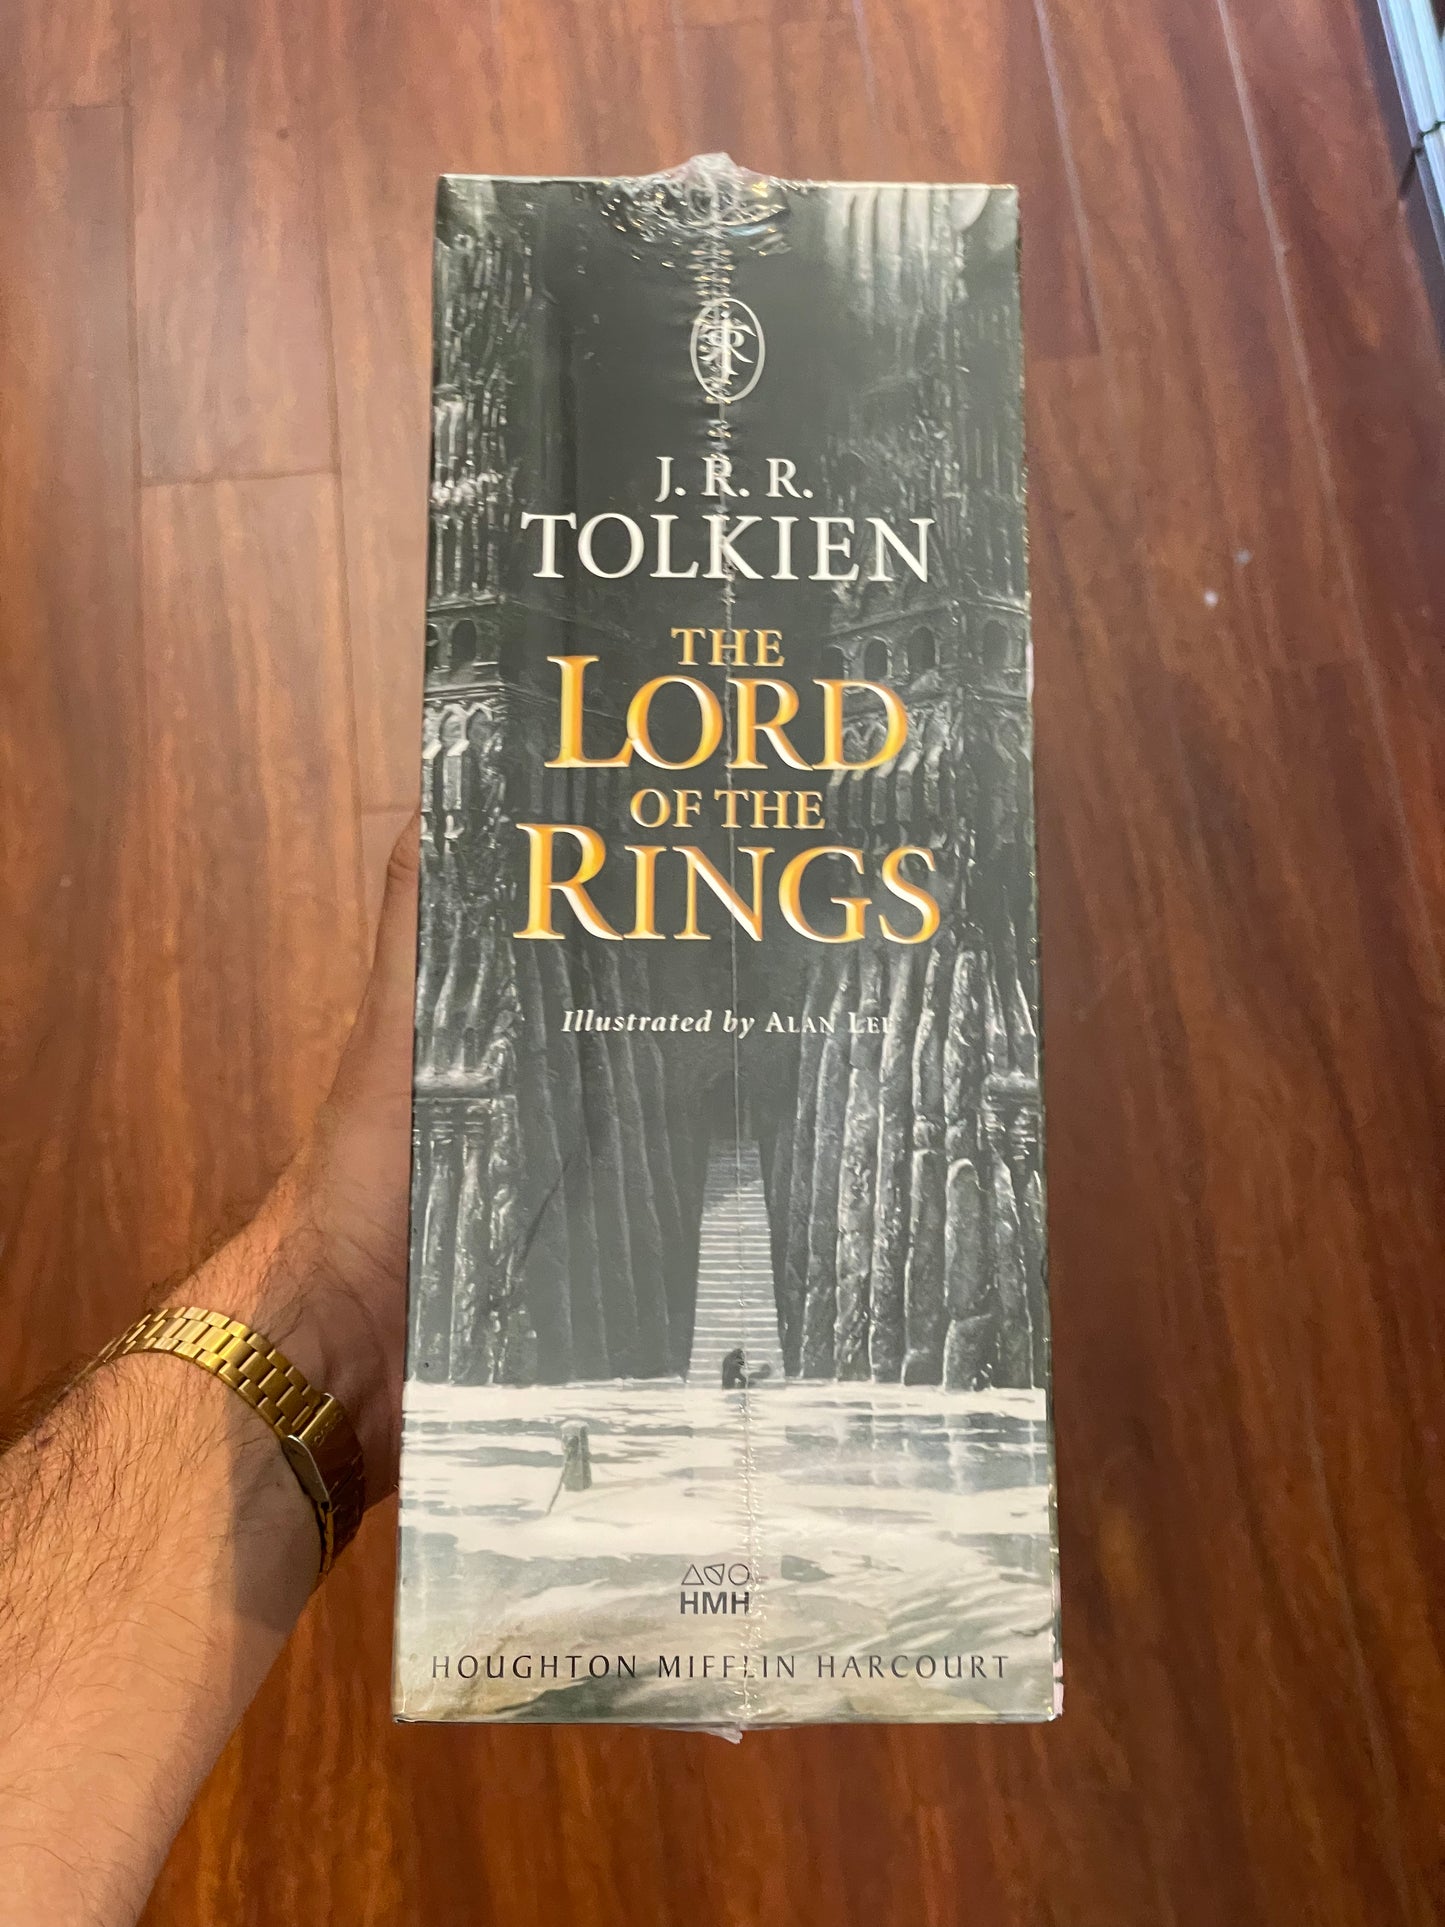 Lord of The Rings Box Set by J.R.R Tolkien